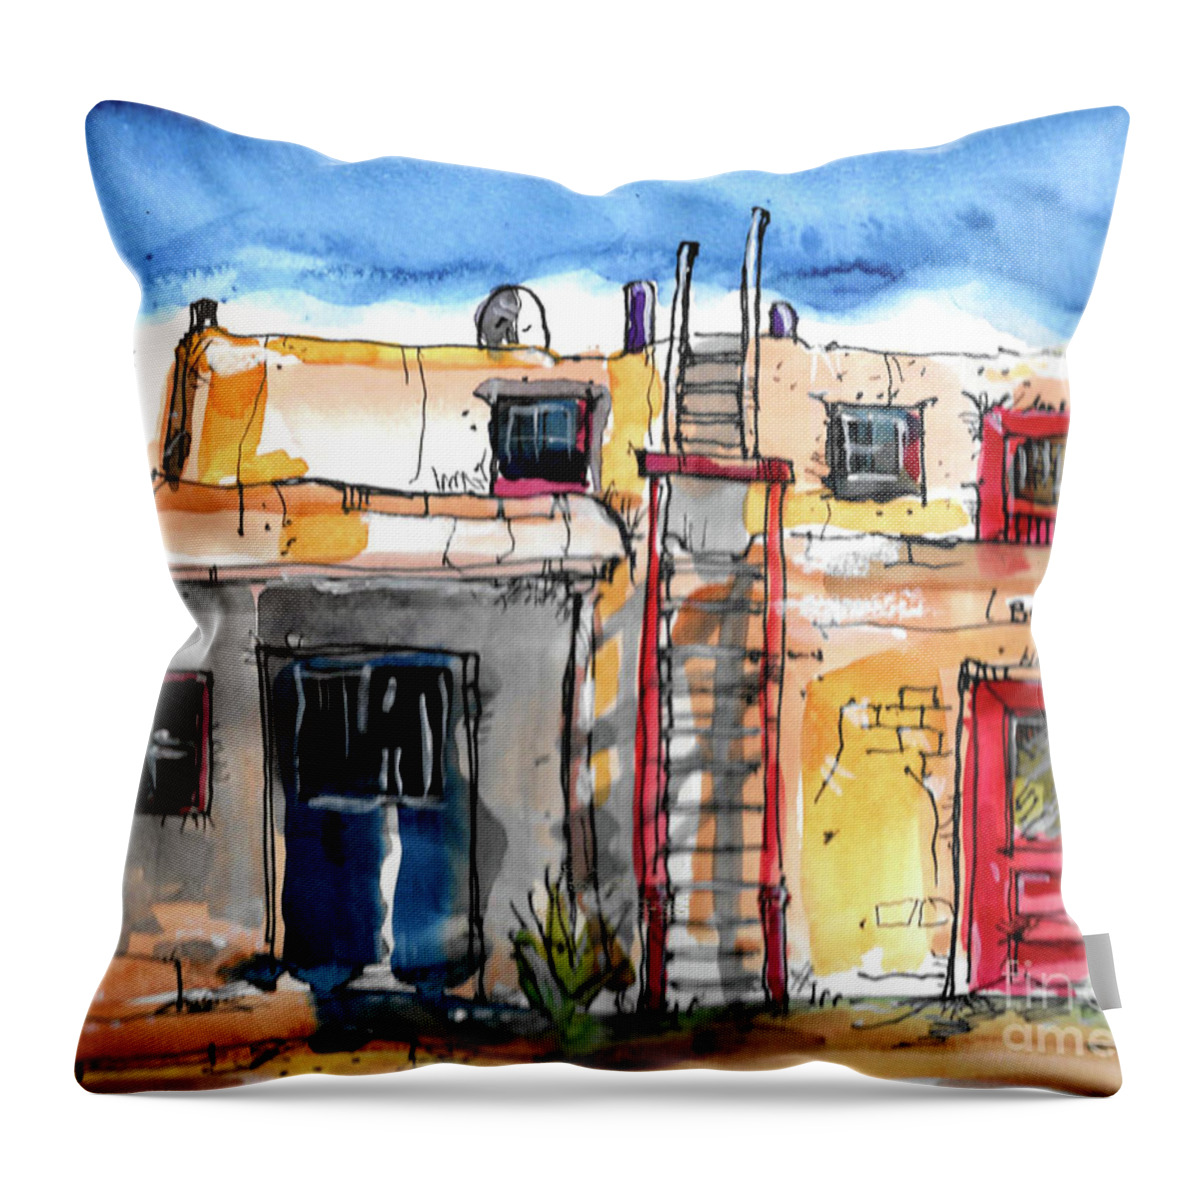 Southwest Throw Pillow featuring the painting Southwestern Home by Terry Banderas